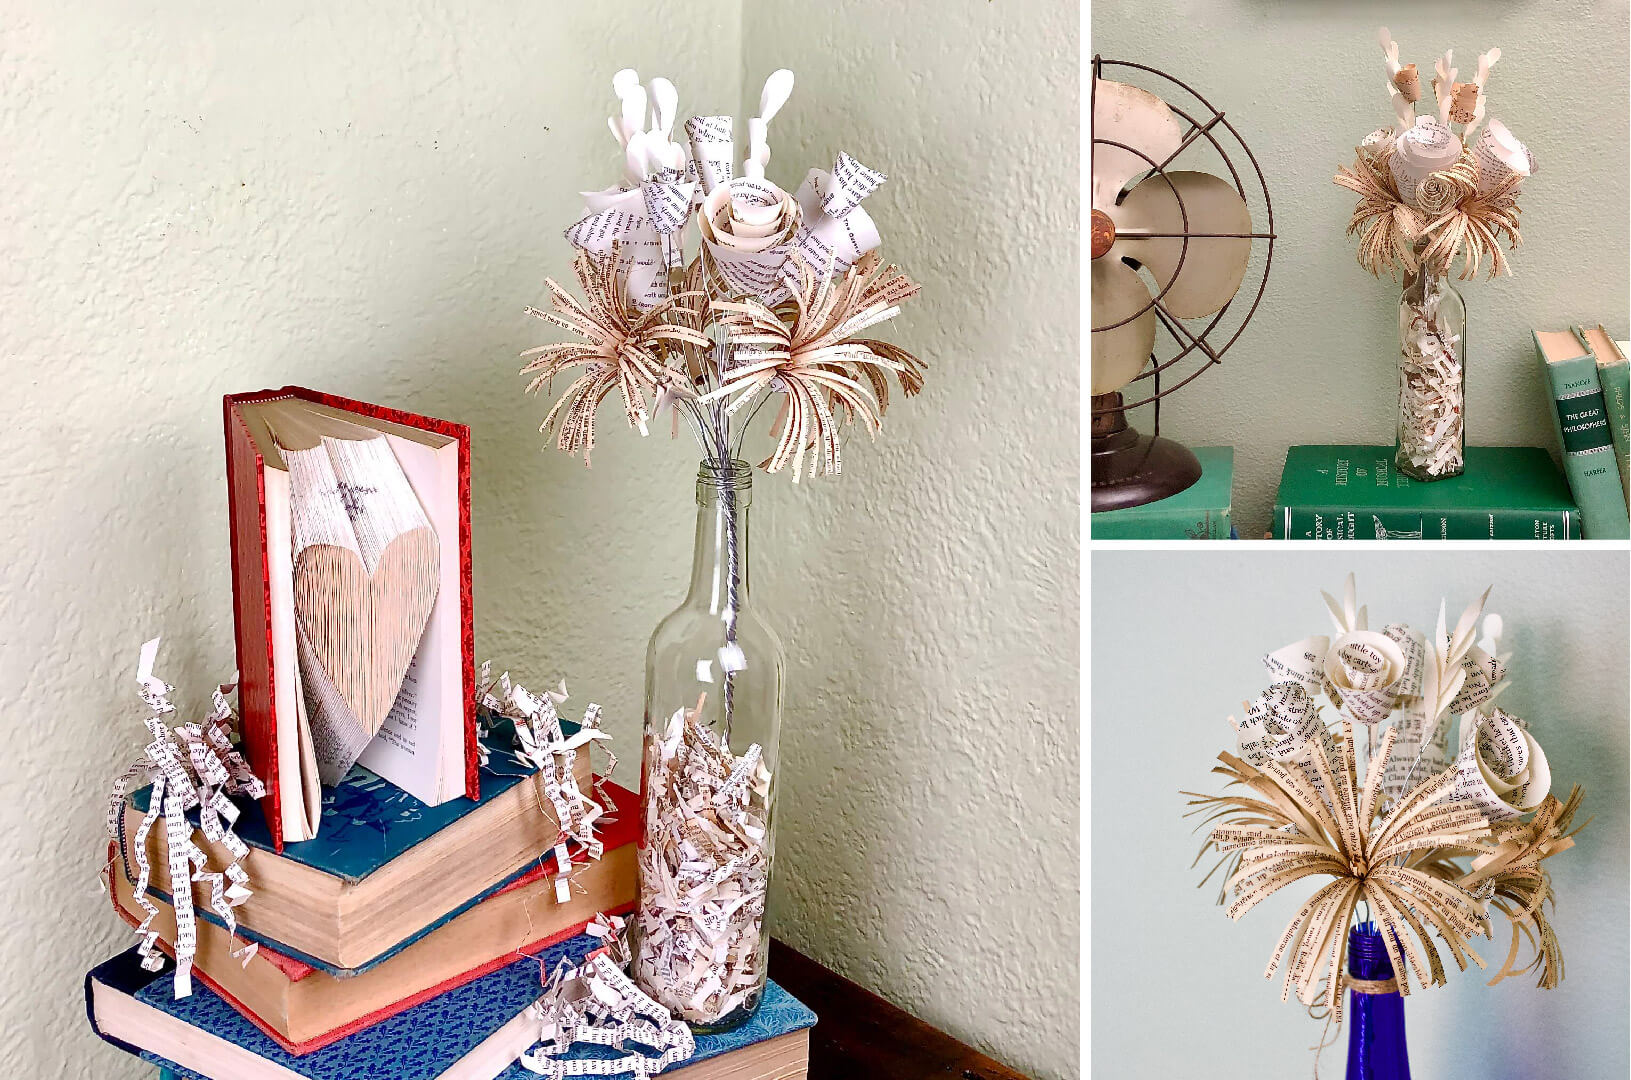 Paper flowers from Fiction Reshaped - By Carly Frei